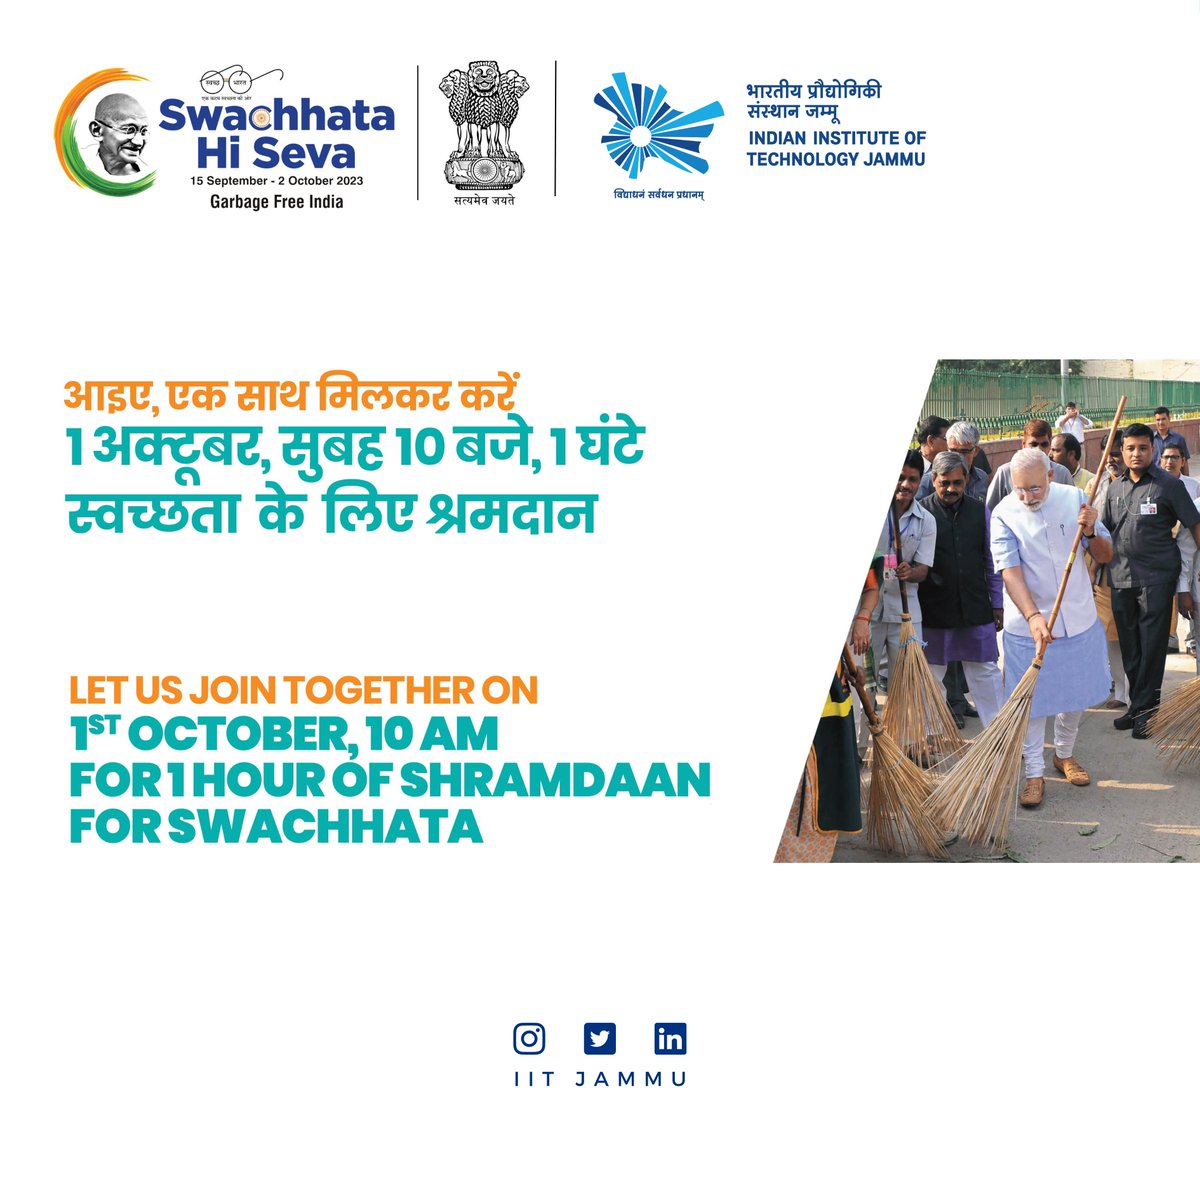 Let us join the #EkTareekhEkGhanta campaign on 1st October 2023, 10 AM, at IIT Jammu and strengthen the #swachchbharatmission.

#SwachhataHiSeva #SwachhBharat #SpecialCampaign3